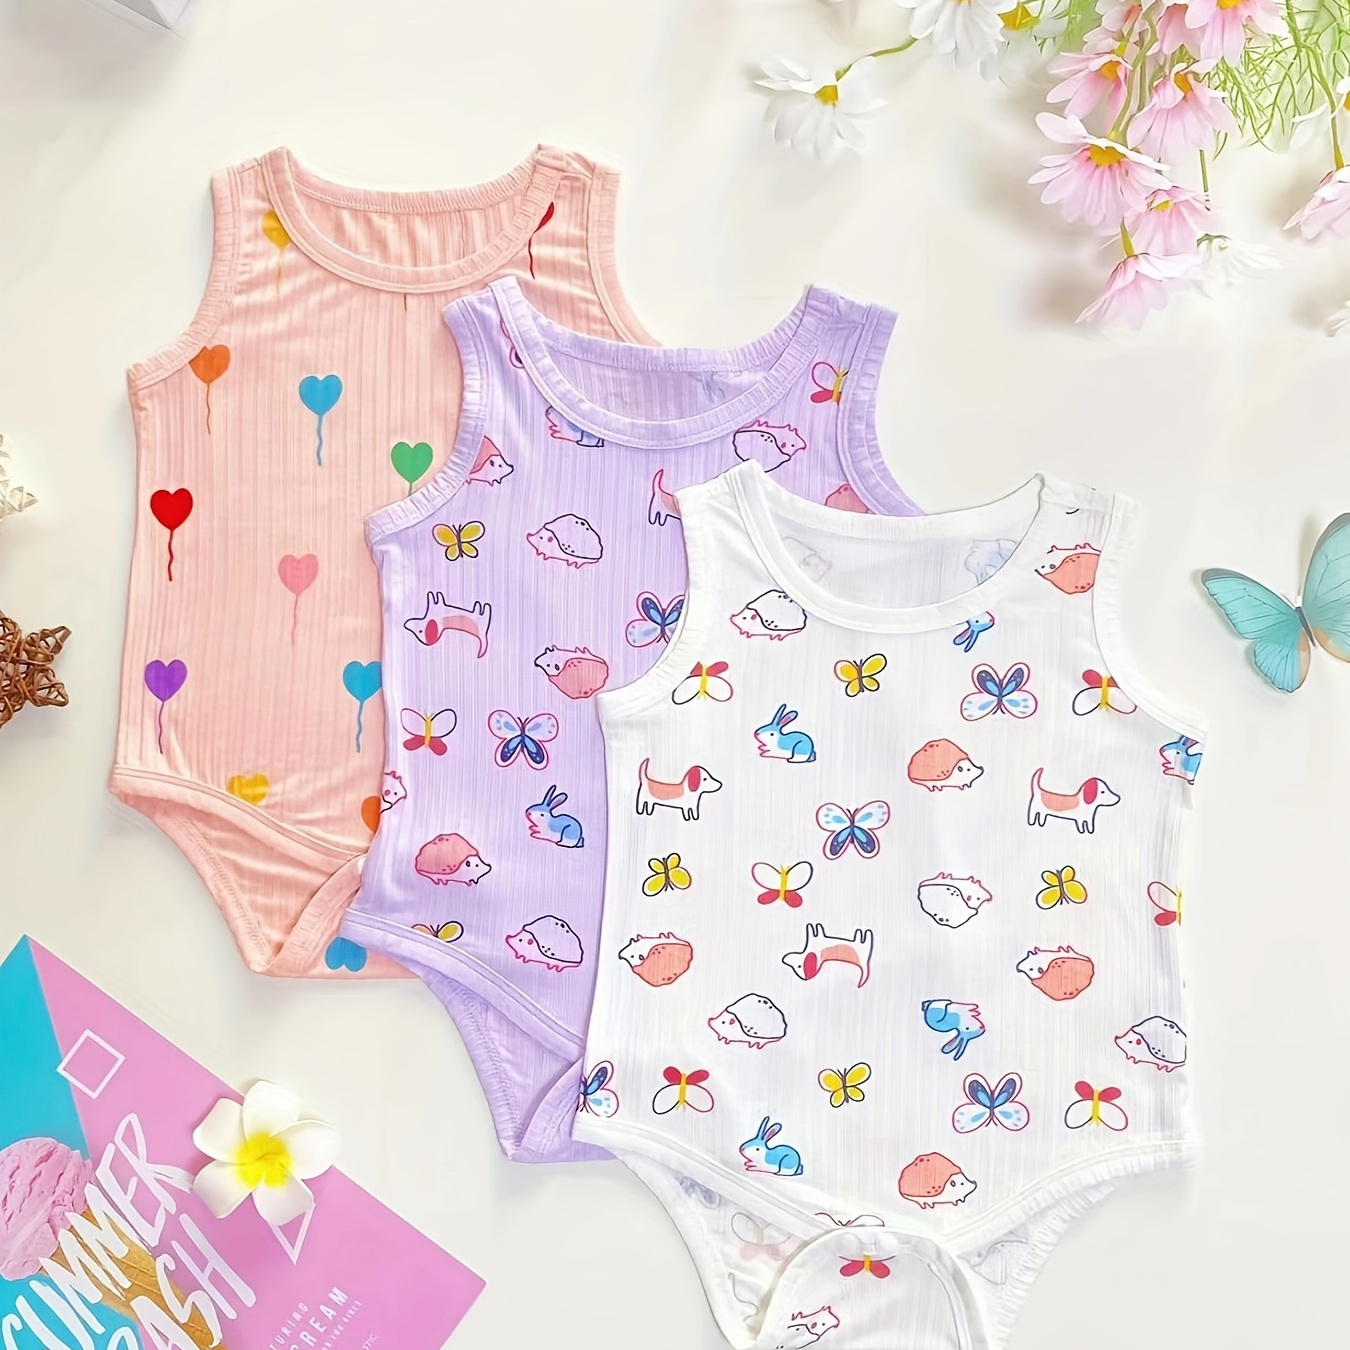 

Baby Girl 3-piece Suit, Spring And Summer New Cute Cartoon Print Comfy & Soft Triangle Romper 3 Colors Available